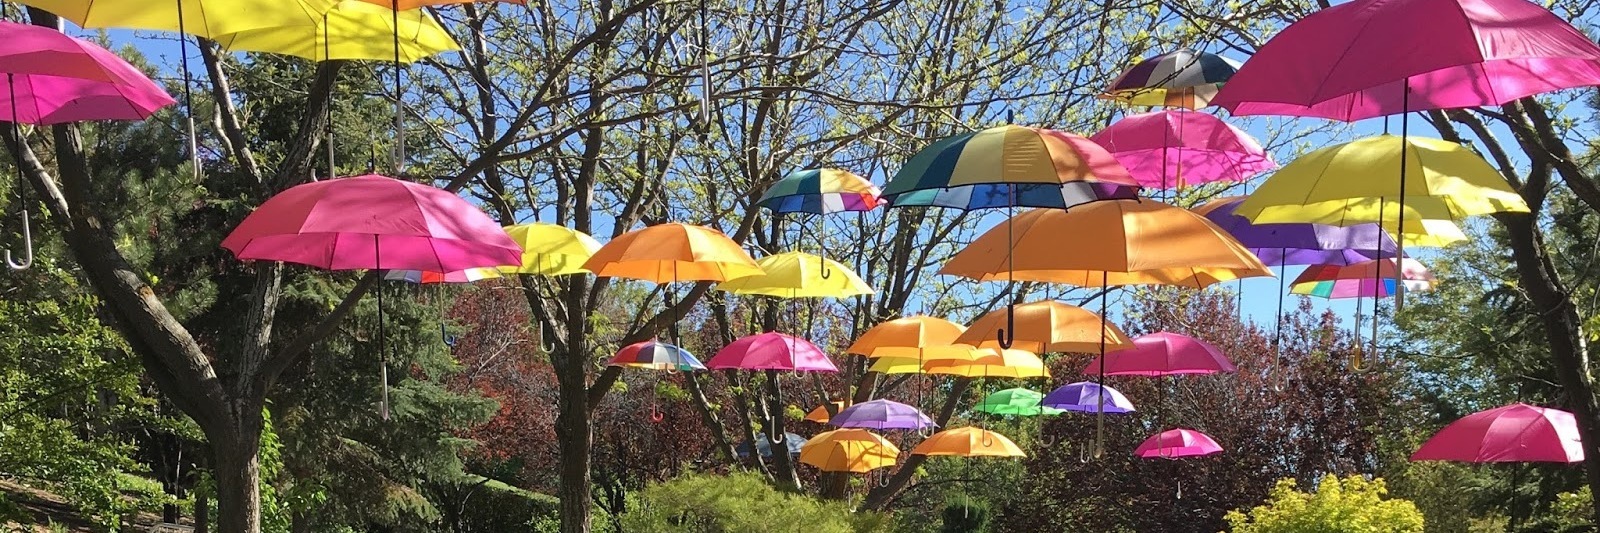 colorful umbrellas hanging in the park with the text 'thee life me and i'll lift thee and we'll ascend together'